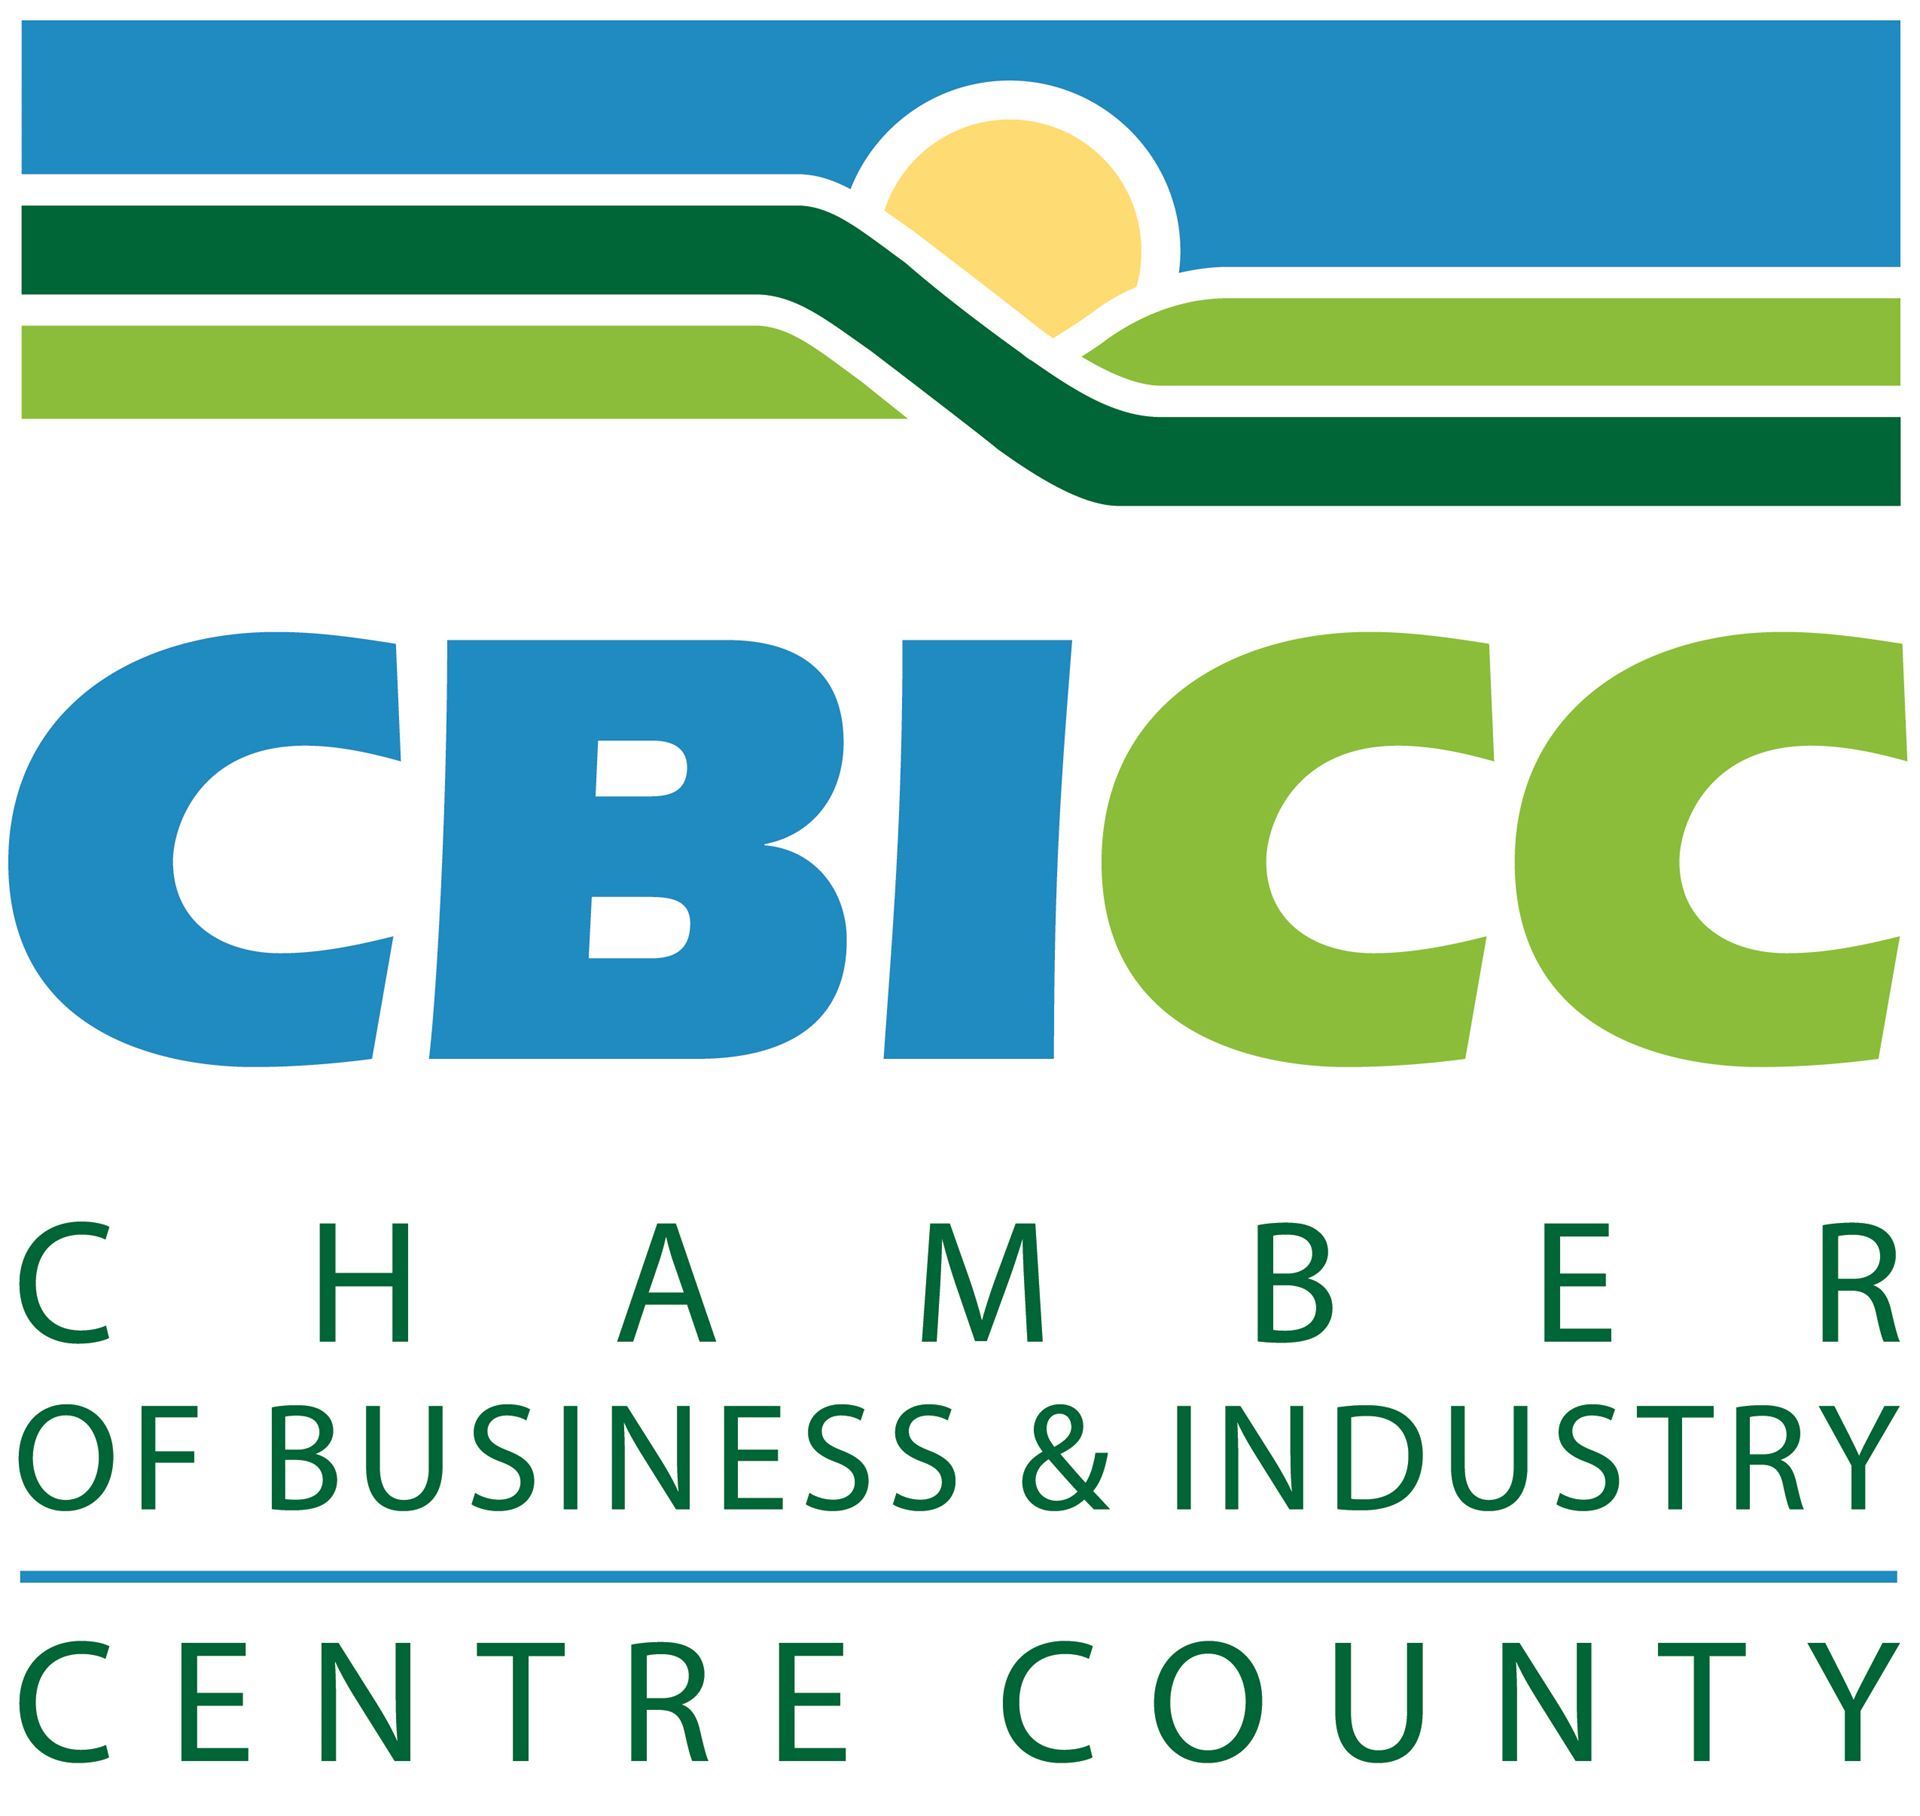 Chamber of Business & Industry of Centre County (CBICC) Logo